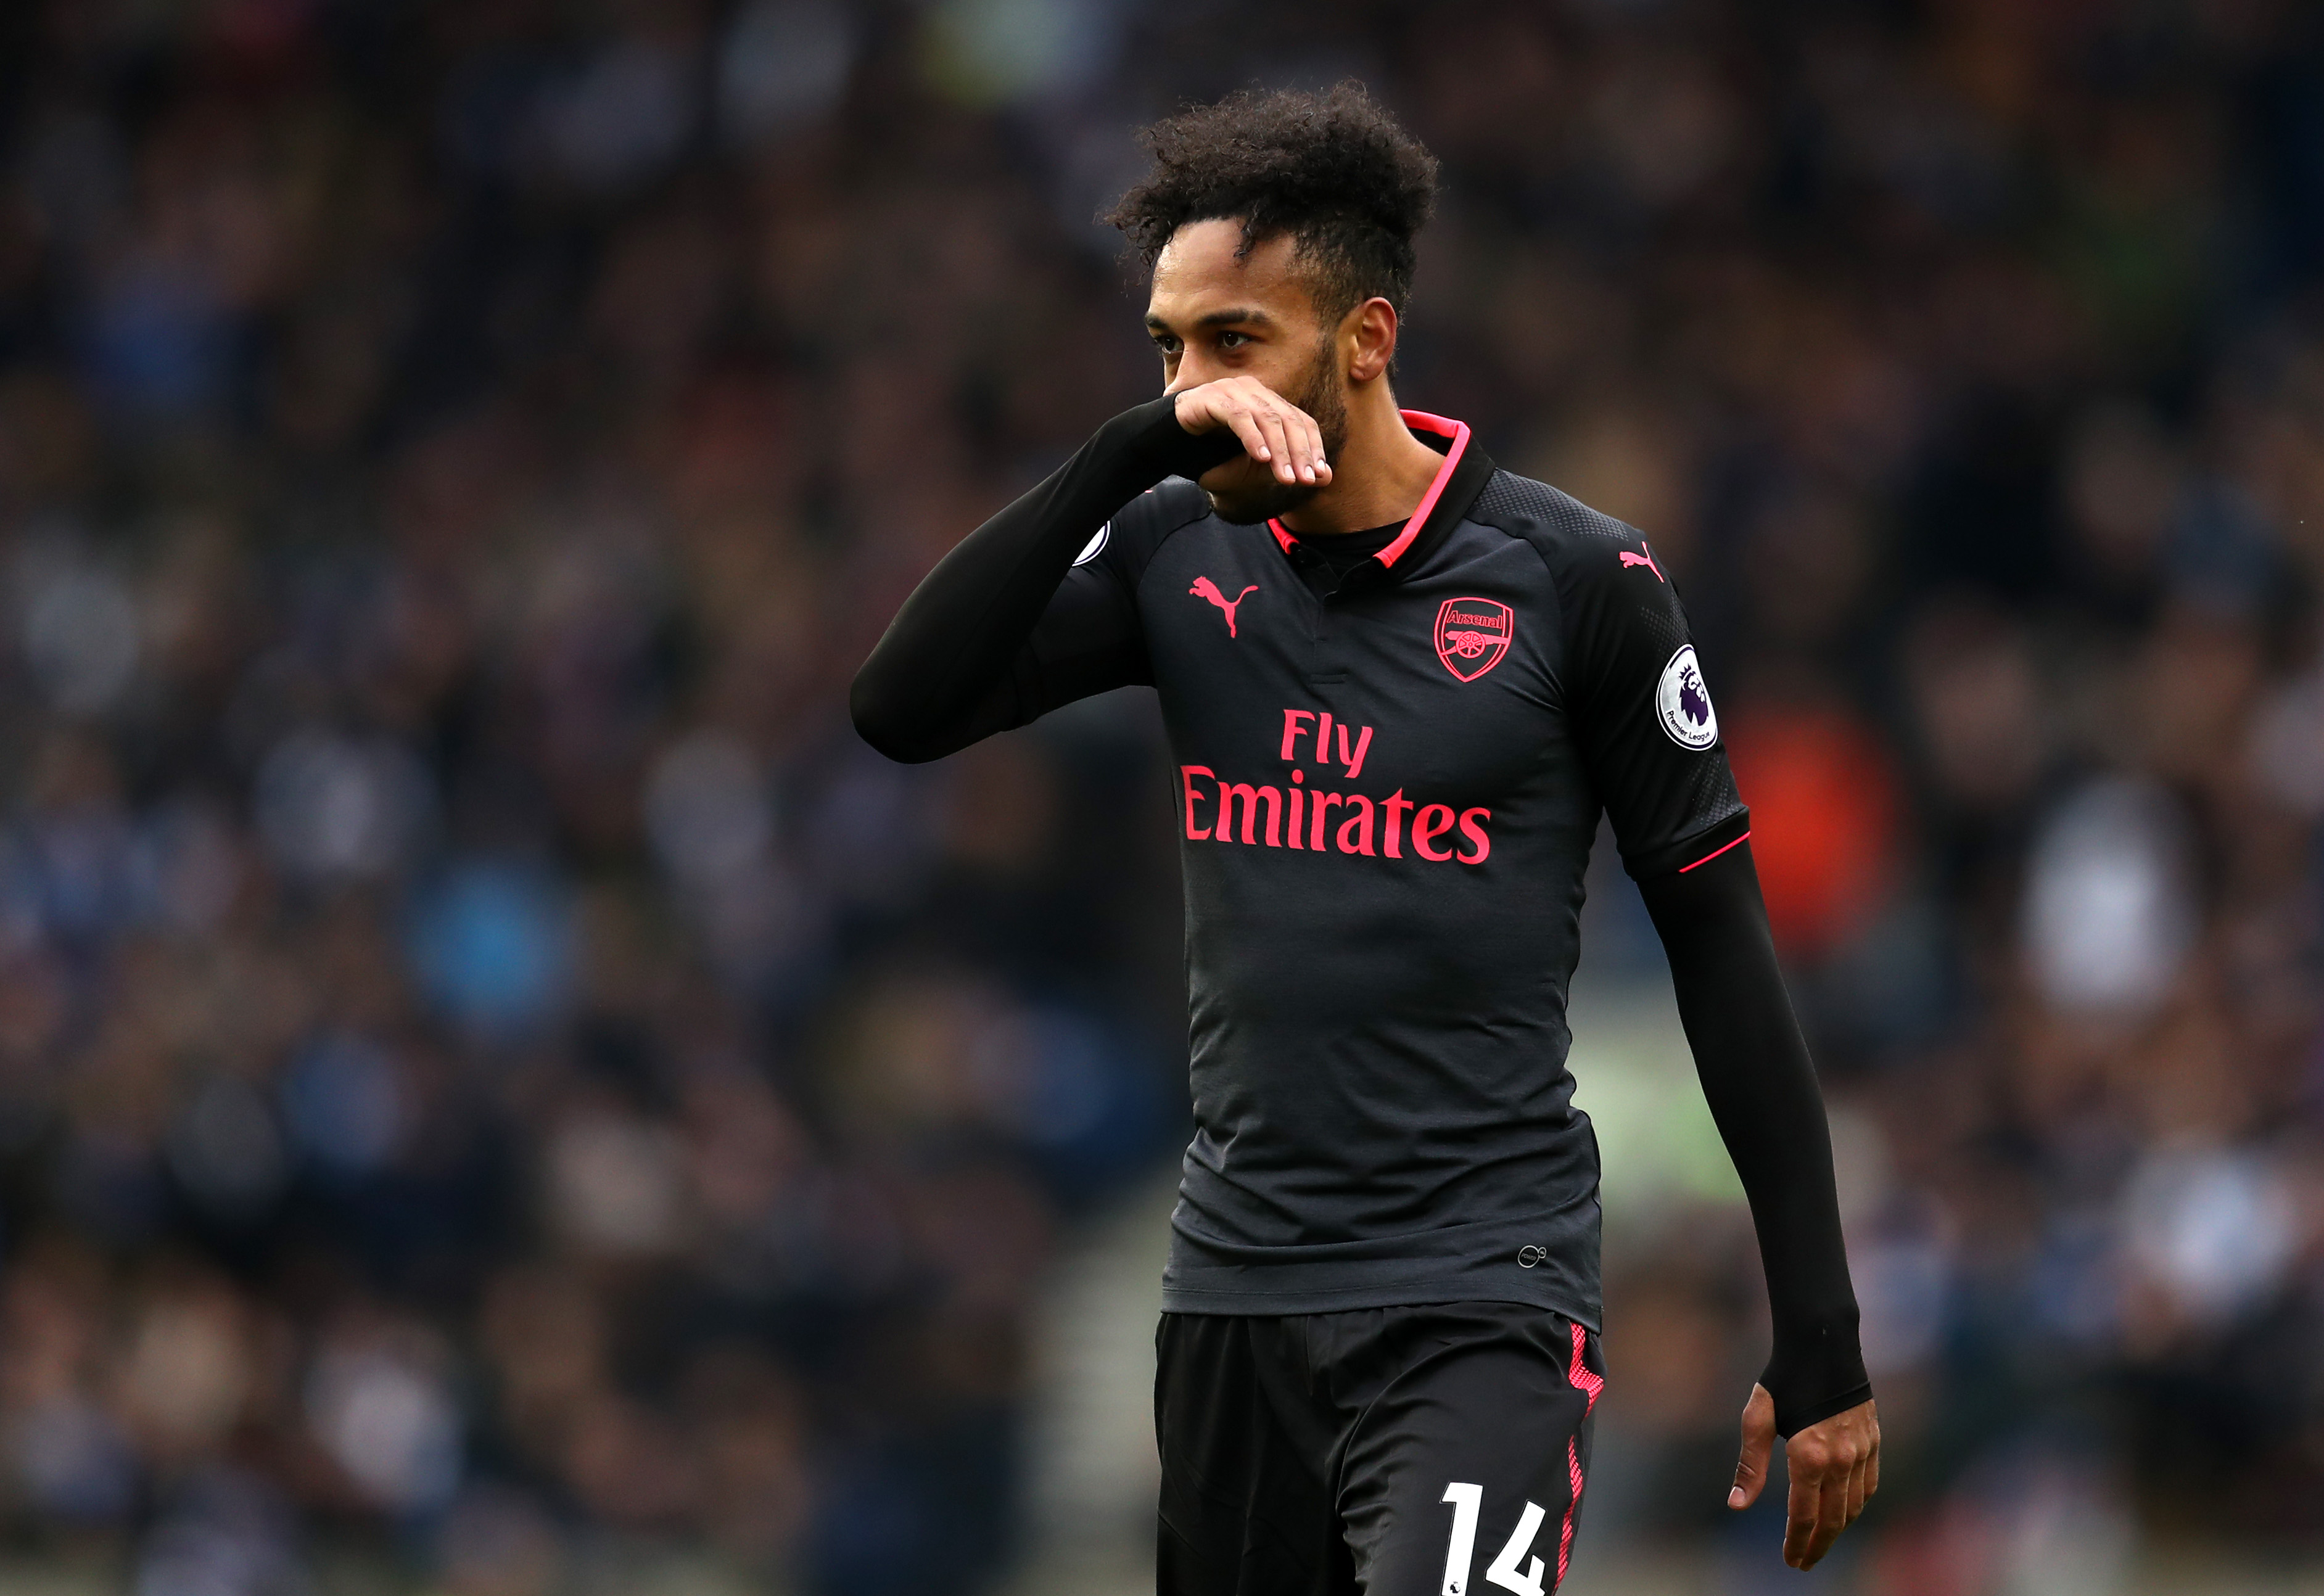 BRIGHTON, ENGLAND - MARCH 04: Pierre-Emerick Aubameyang of Arsenal looks dejected during the Premier League match between Brighton and Hove Albion and Arsenal at Amex Stadium on March 4, 2018 in Brighton, England. (Photo by Catherine Ivill/Getty Images)